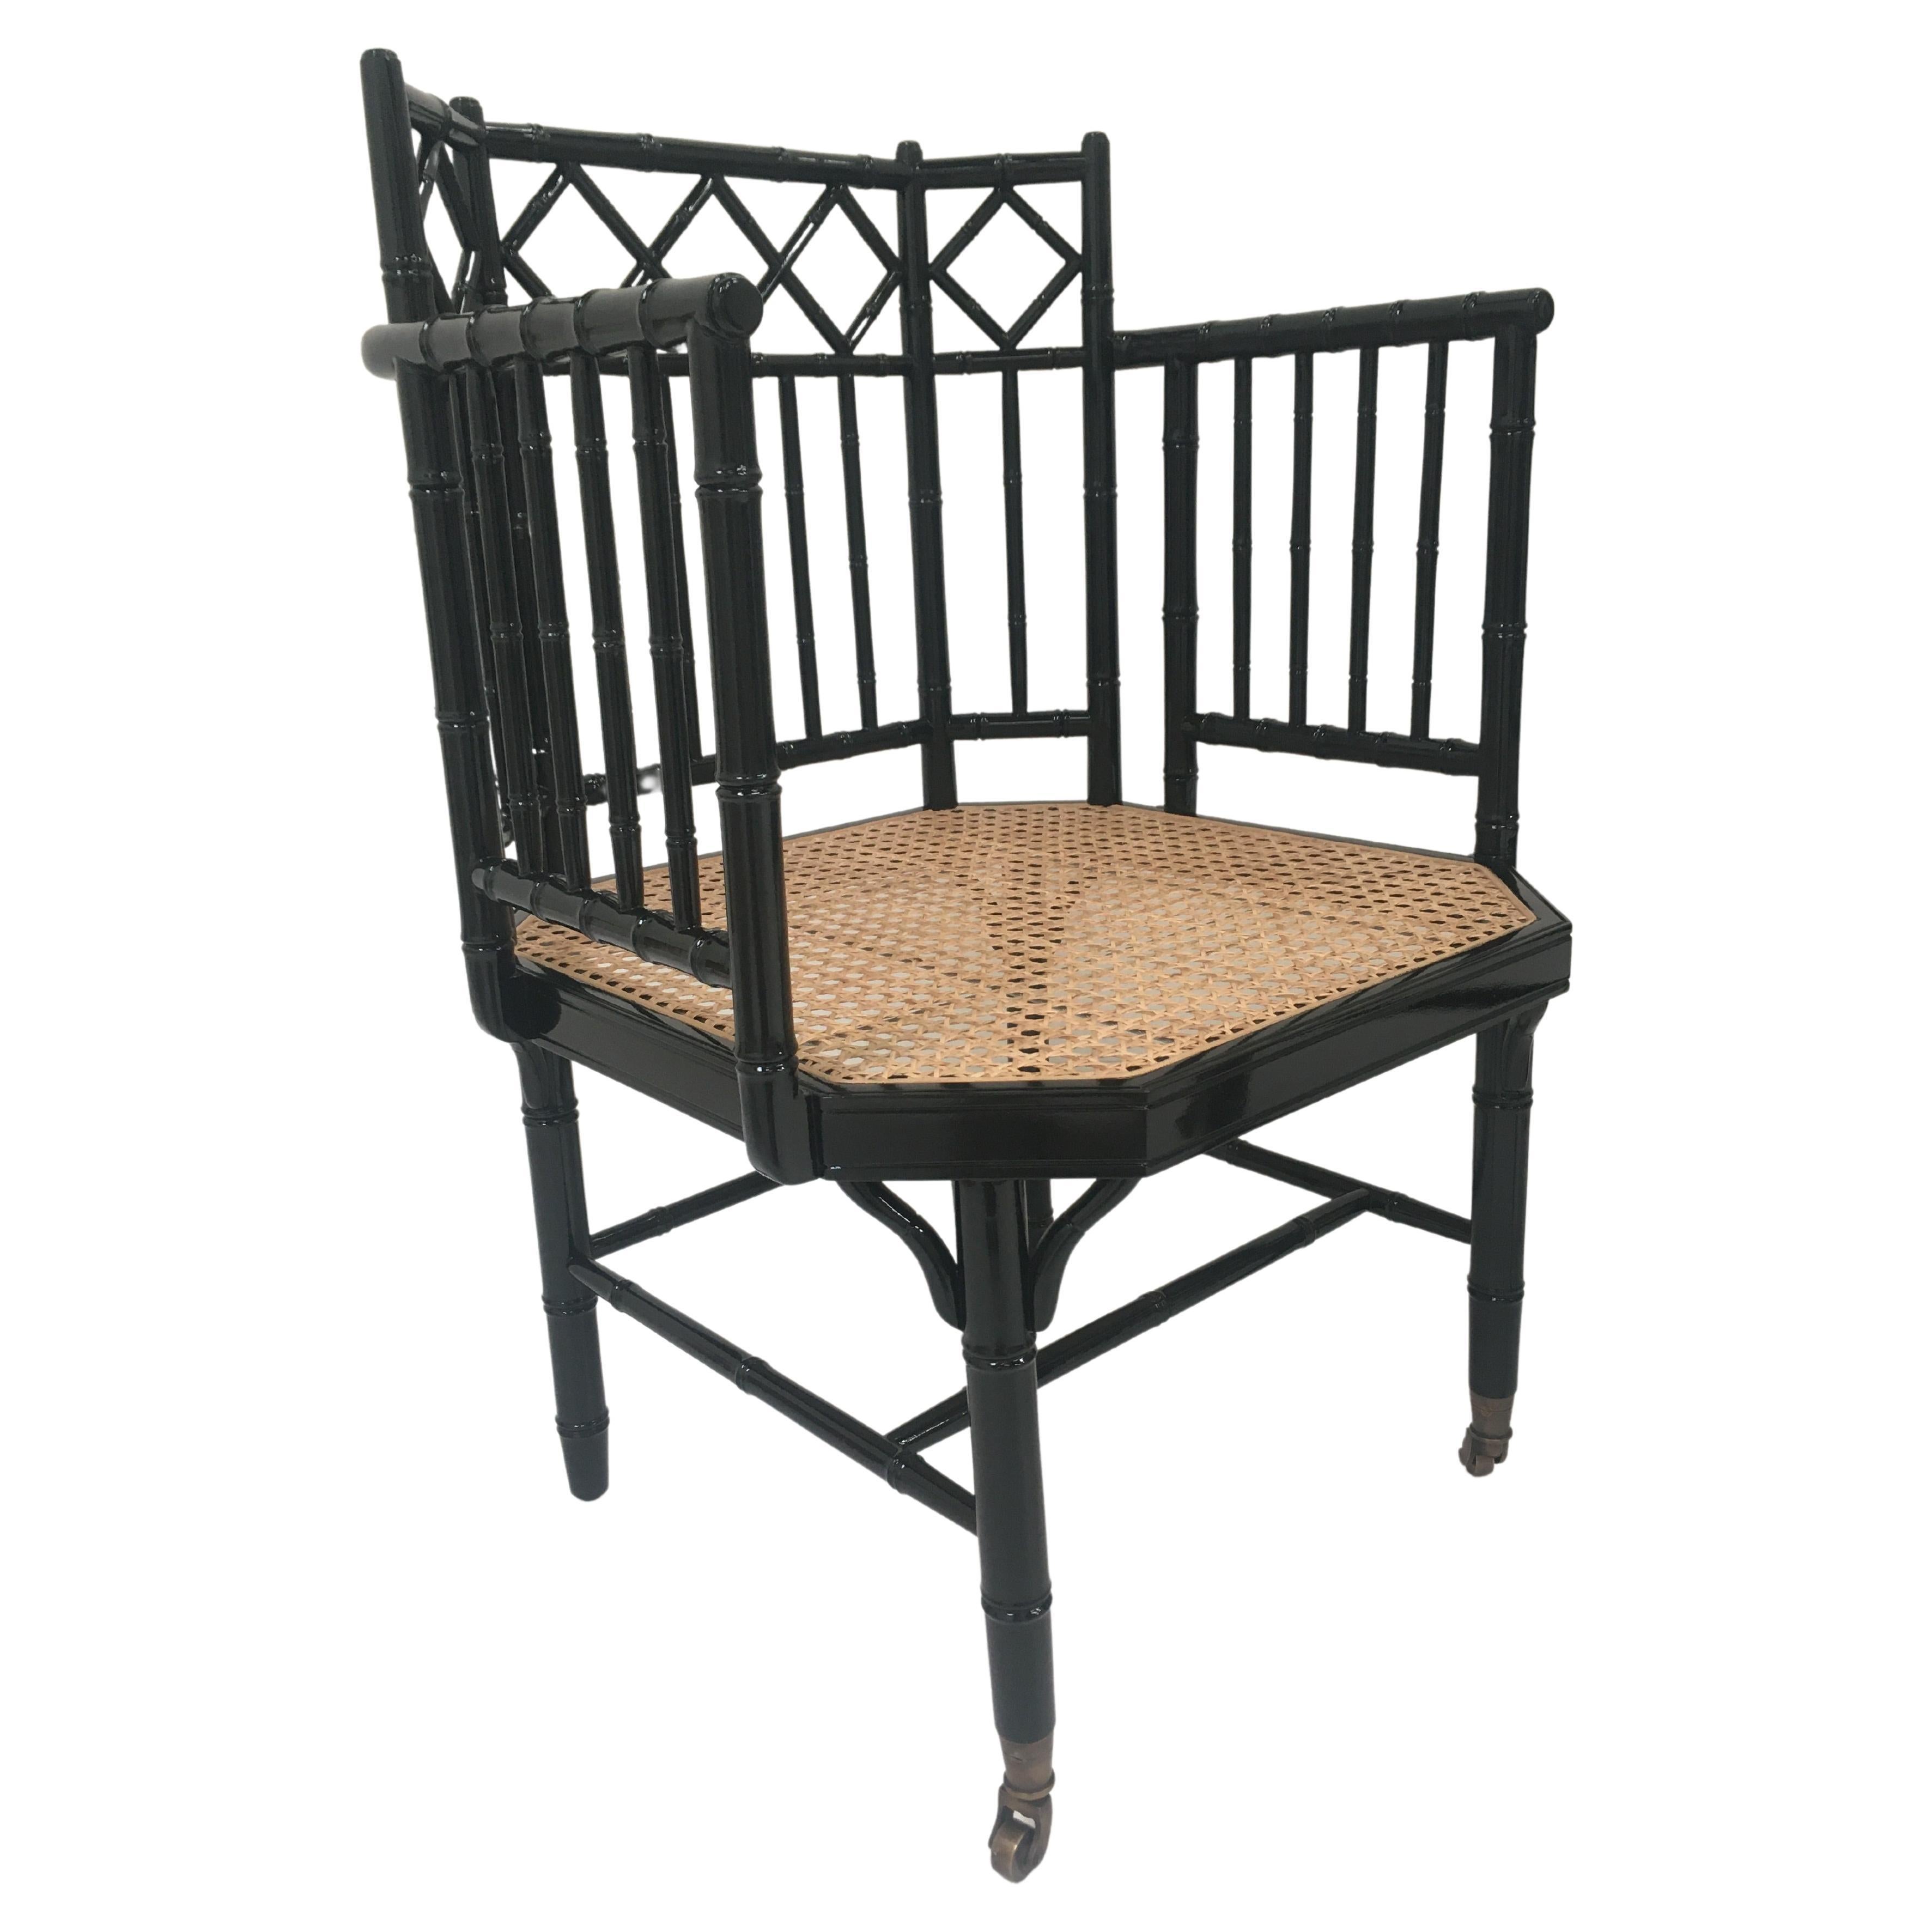 Black Lacquer Wooden Bamboo Effect Cane Seat and Brass Finishes Chair For Sale